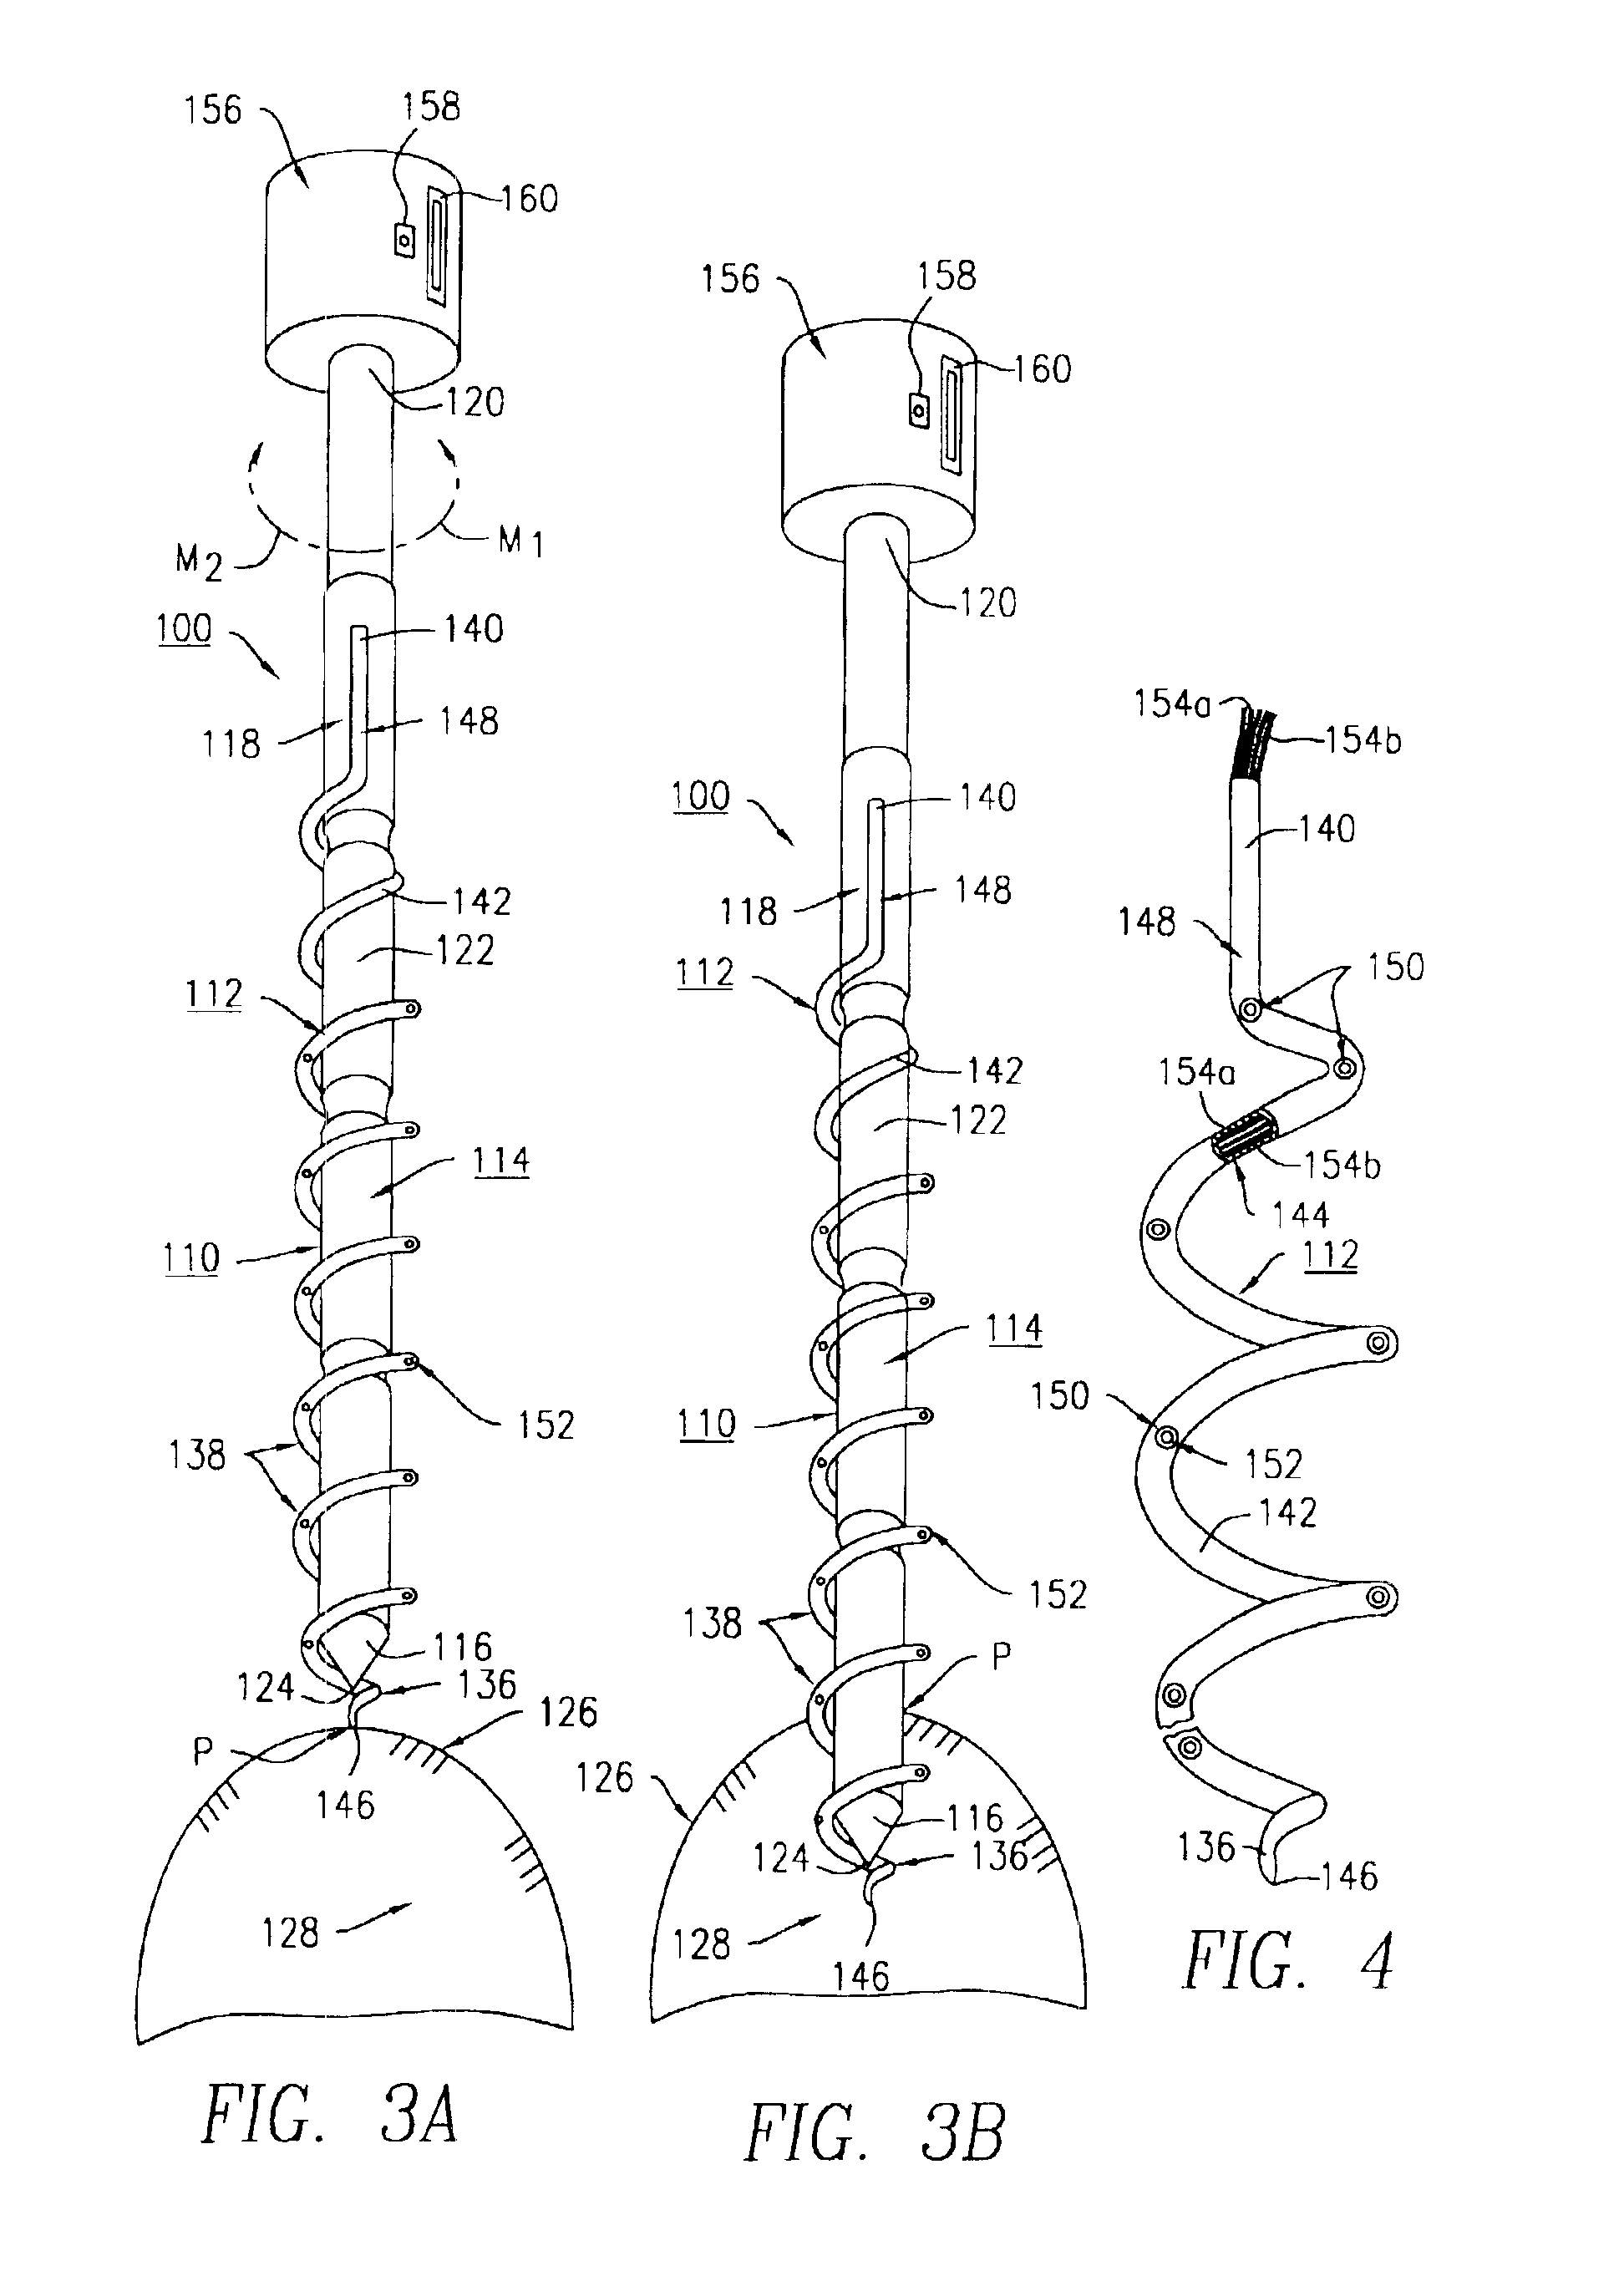 Helical device and method for aiding the ablation and assessment of tissue